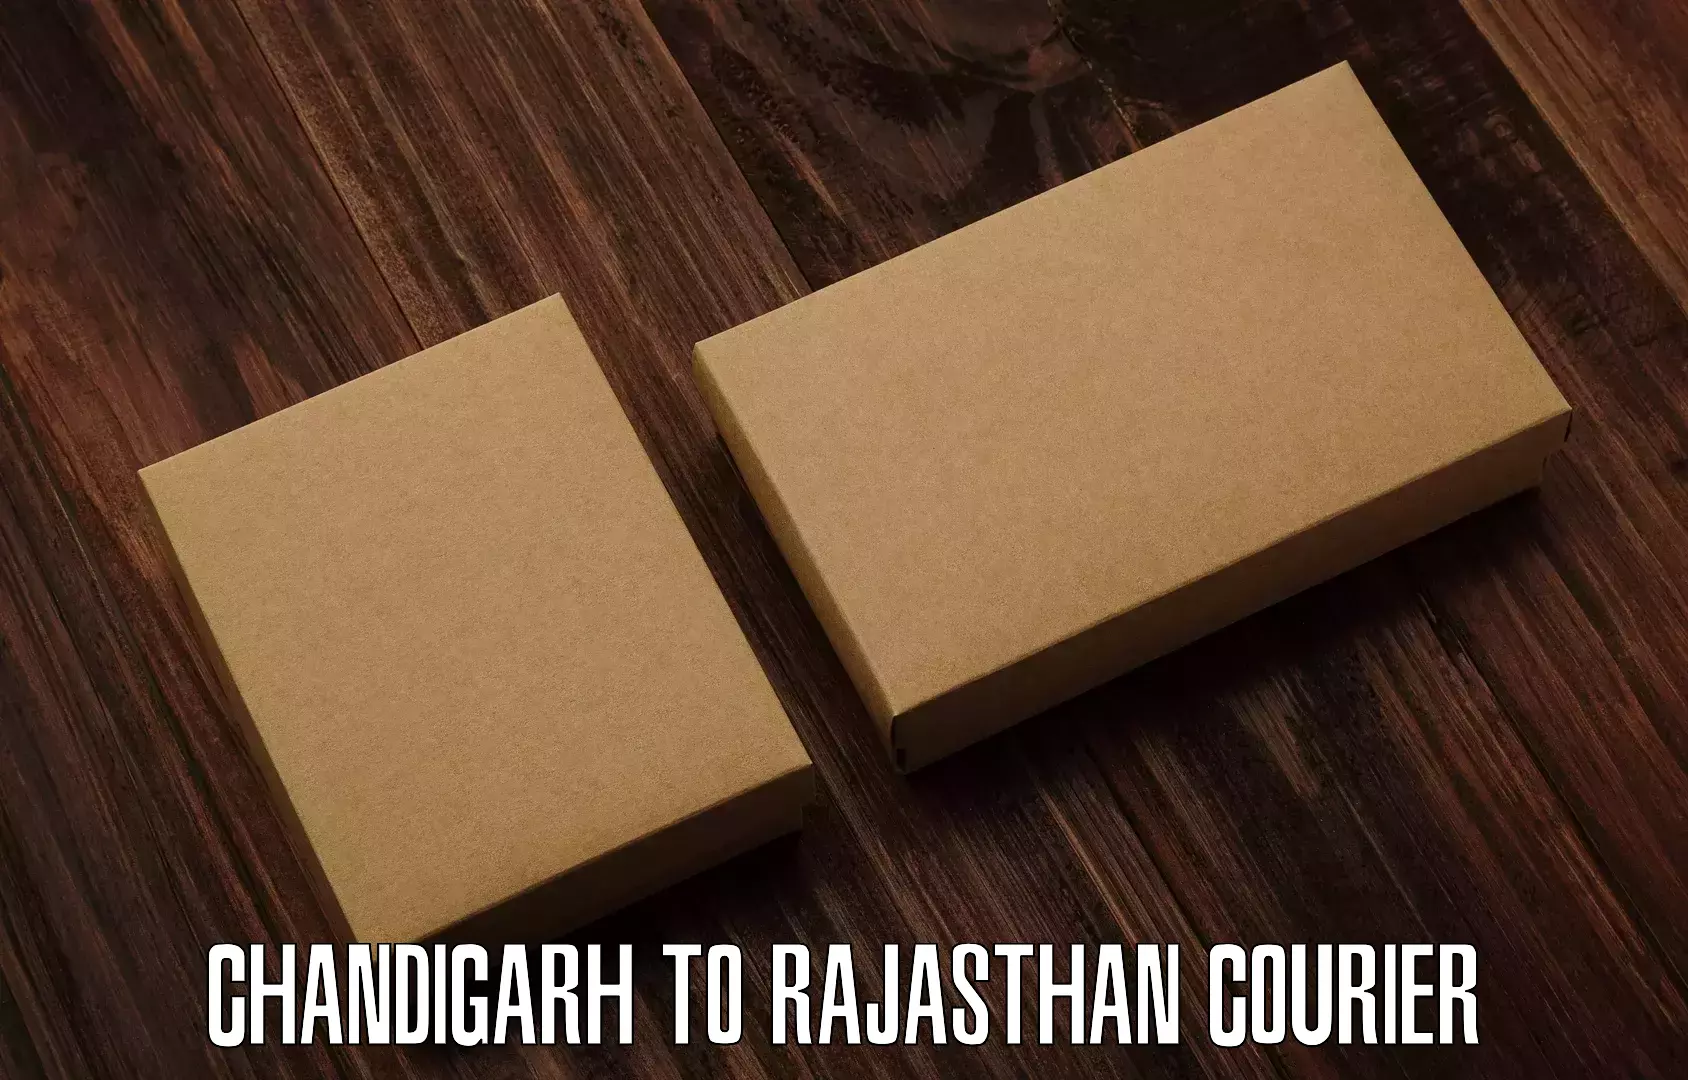 Sustainable shipping practices Chandigarh to Rajasthan